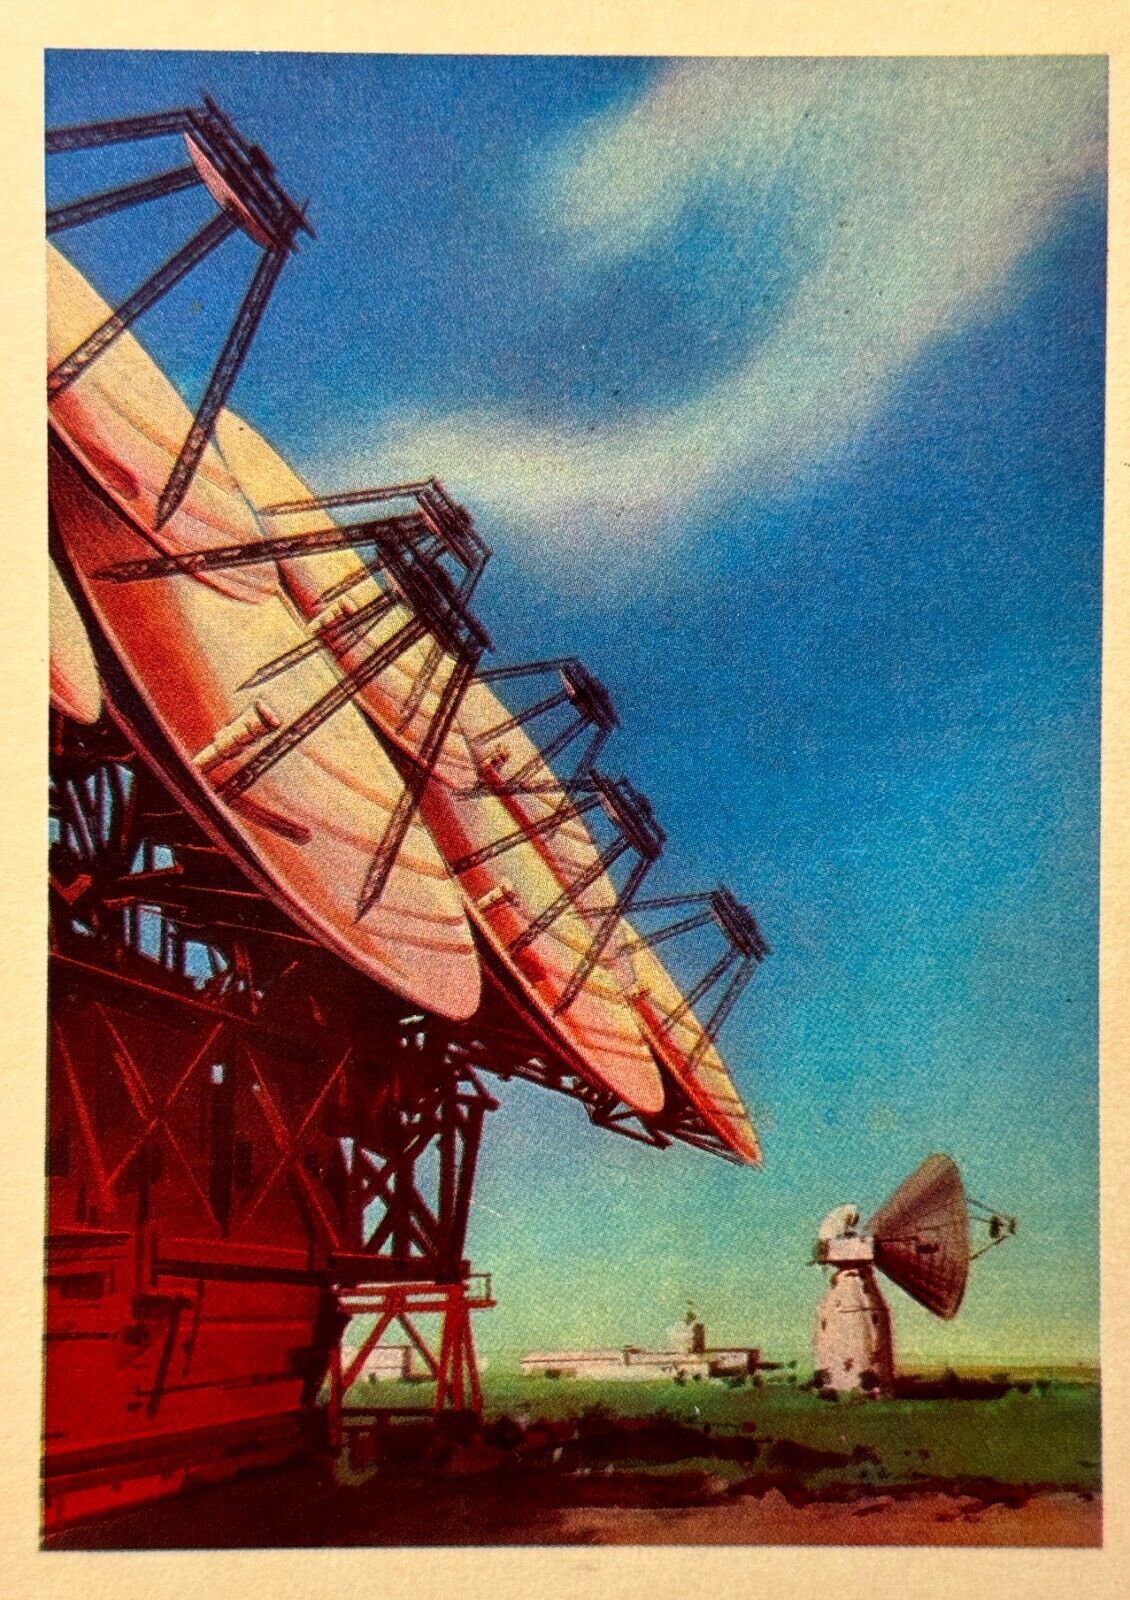 1971 Fantastic Space Art Connection with Space Soviet Vintage Postcard